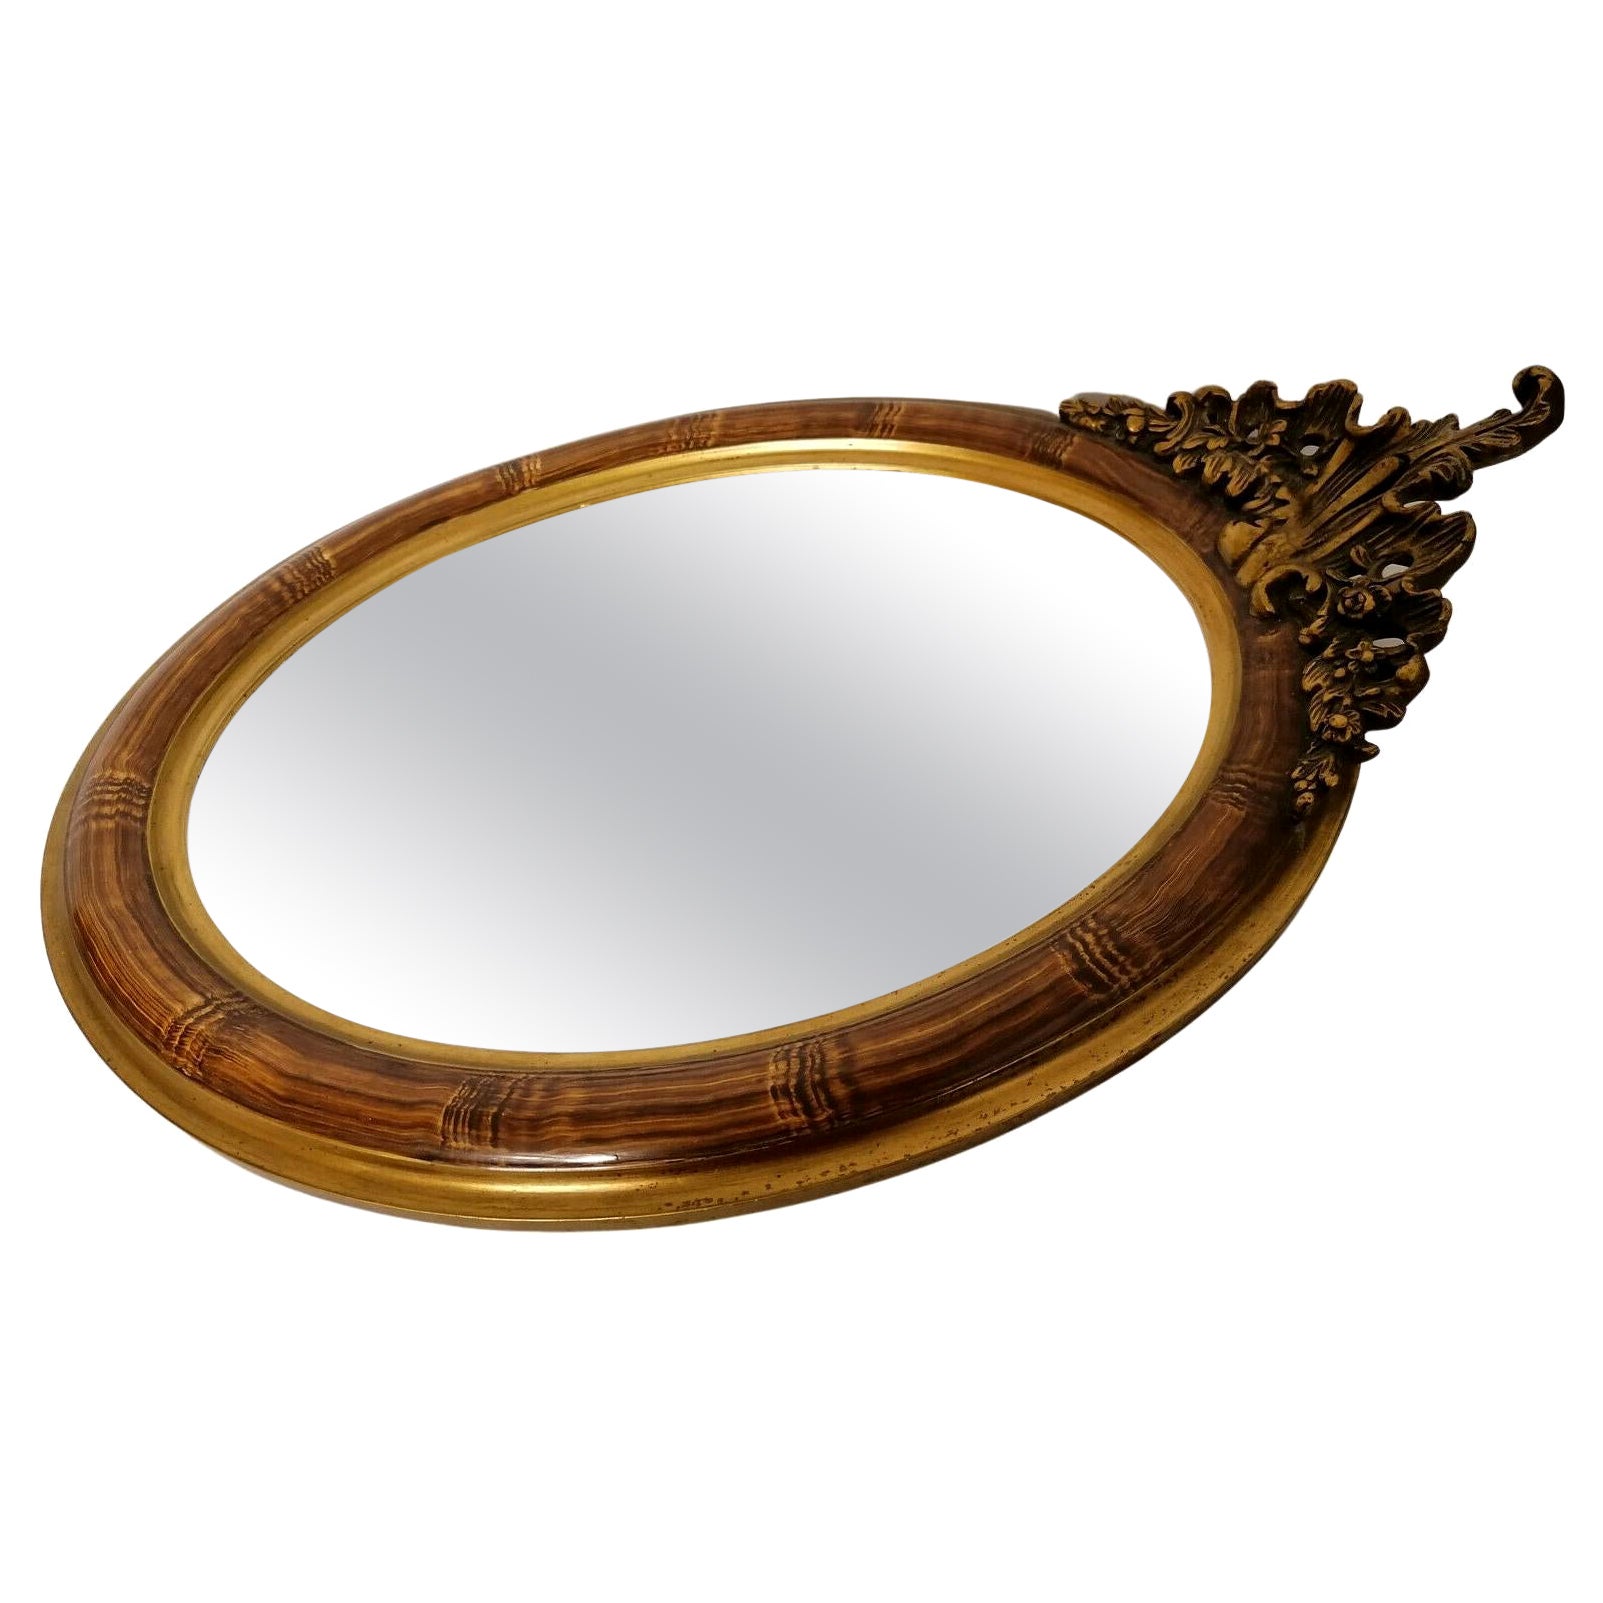 19th Century French Louis XVI Carved Gilt-Wood Oval Wall Mirror For Sale